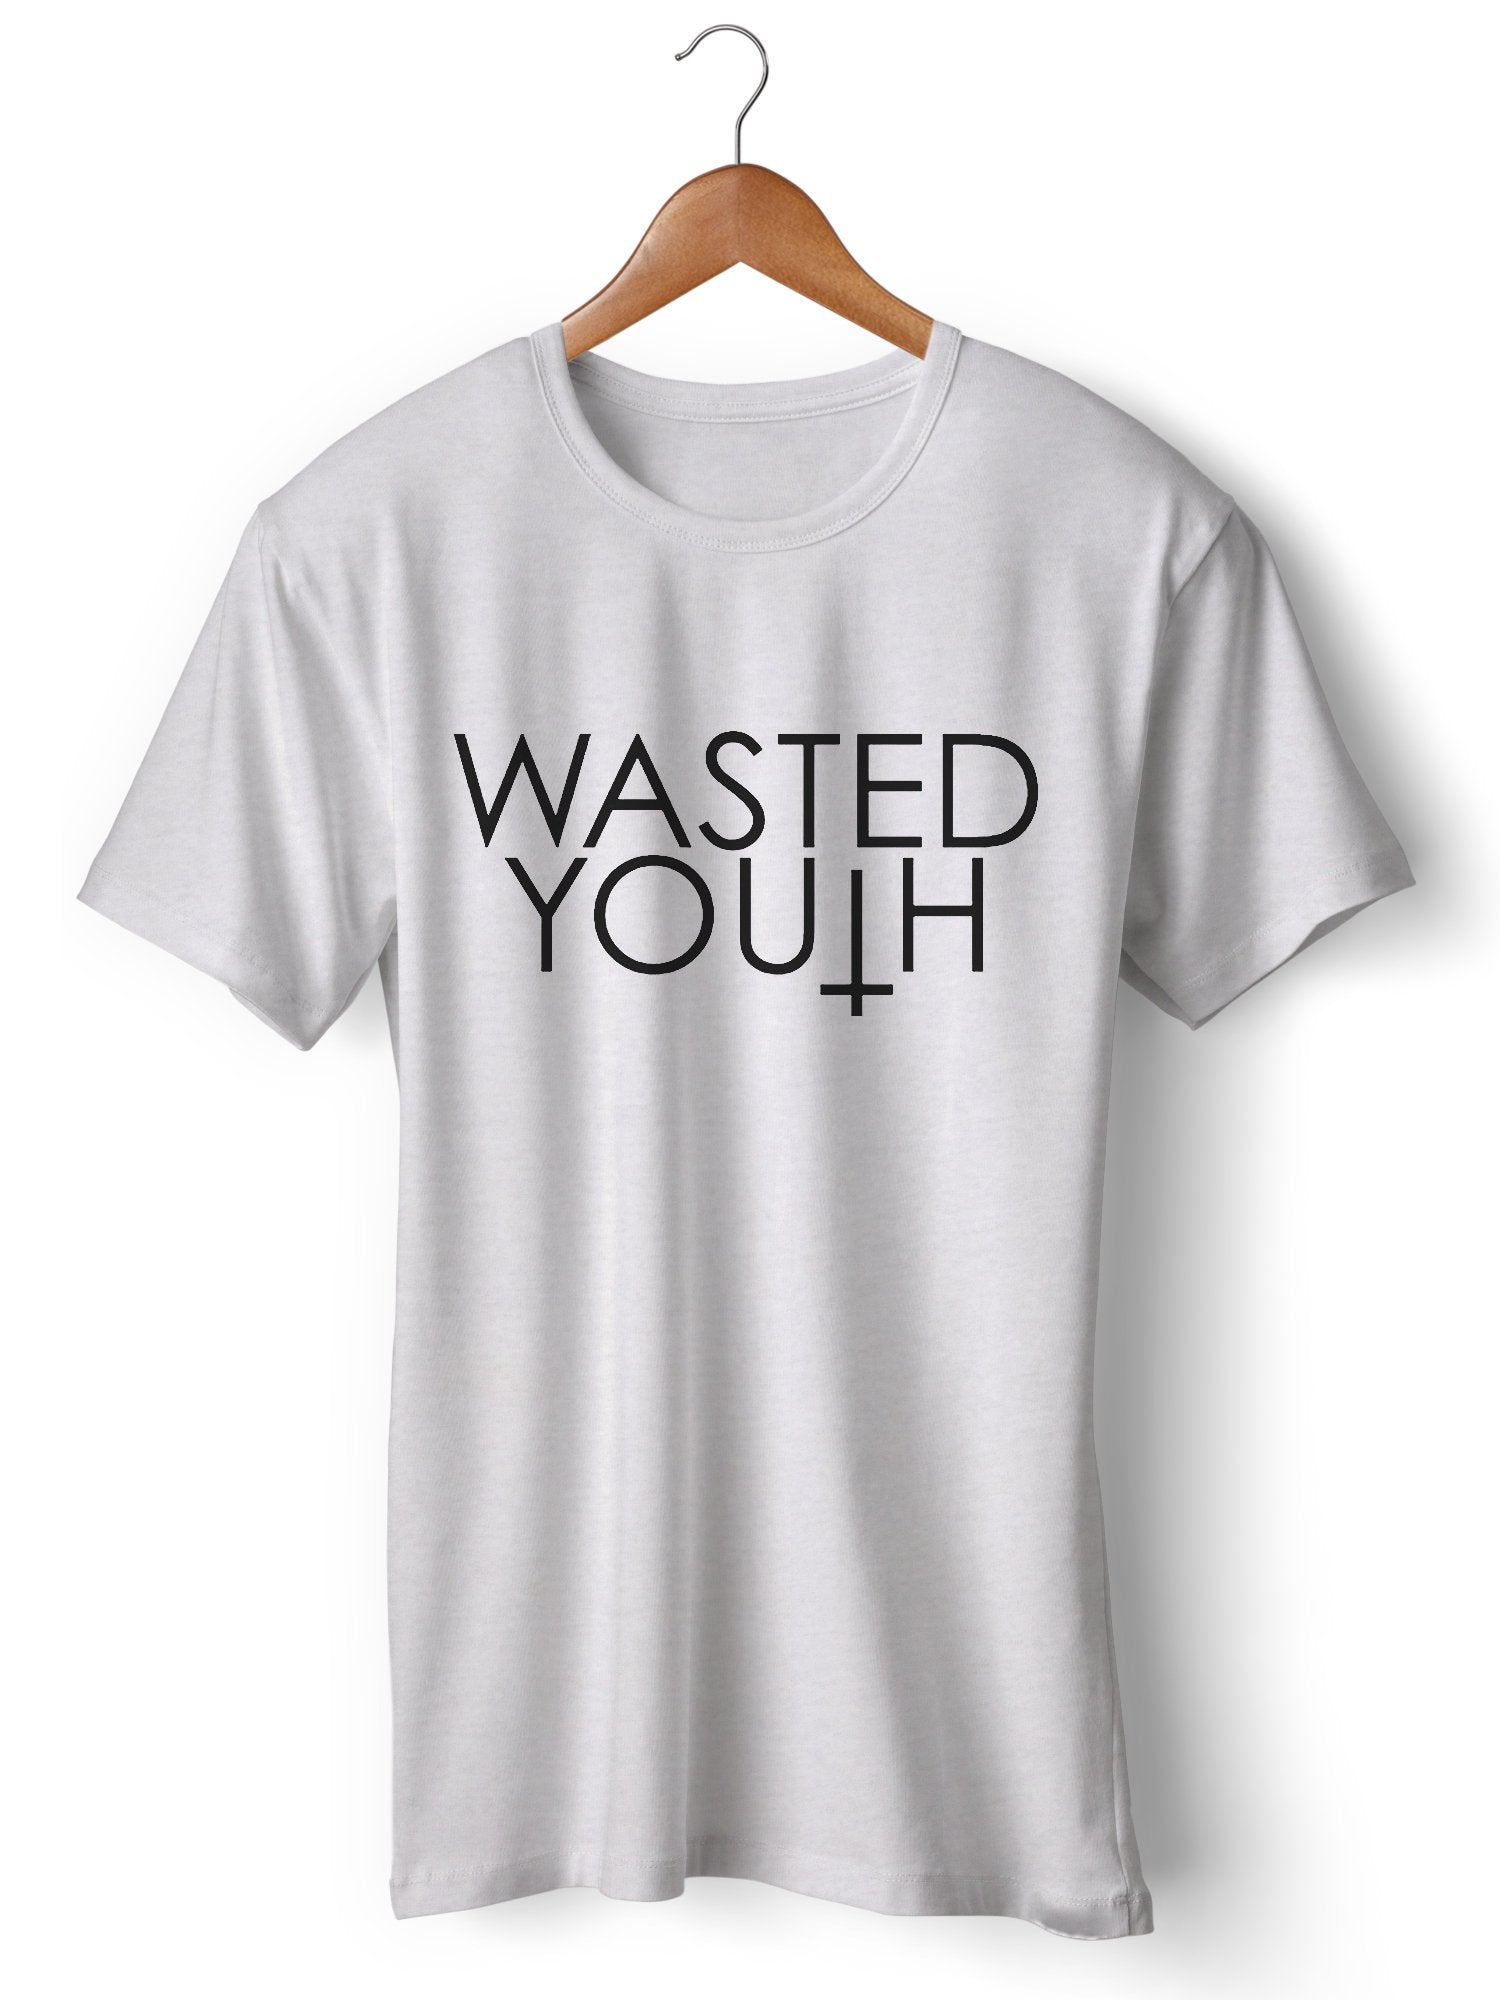 Wasted Youth Premium Mens T-Shirt